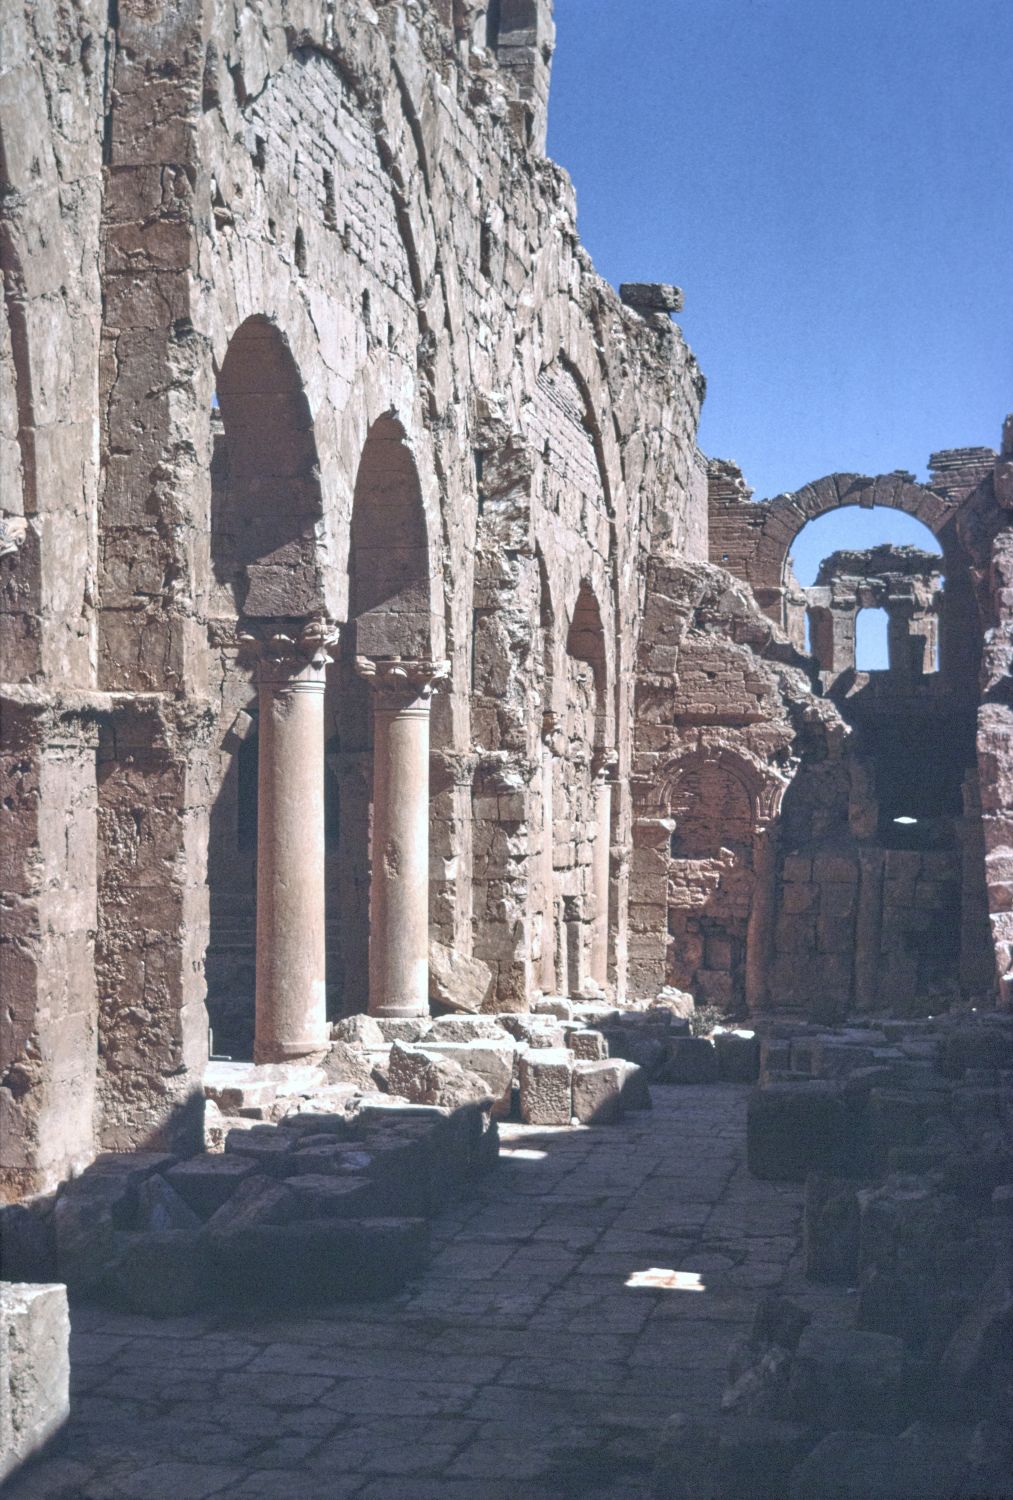 View of south side aisle looking east, showing arcade between side aisle and nave.